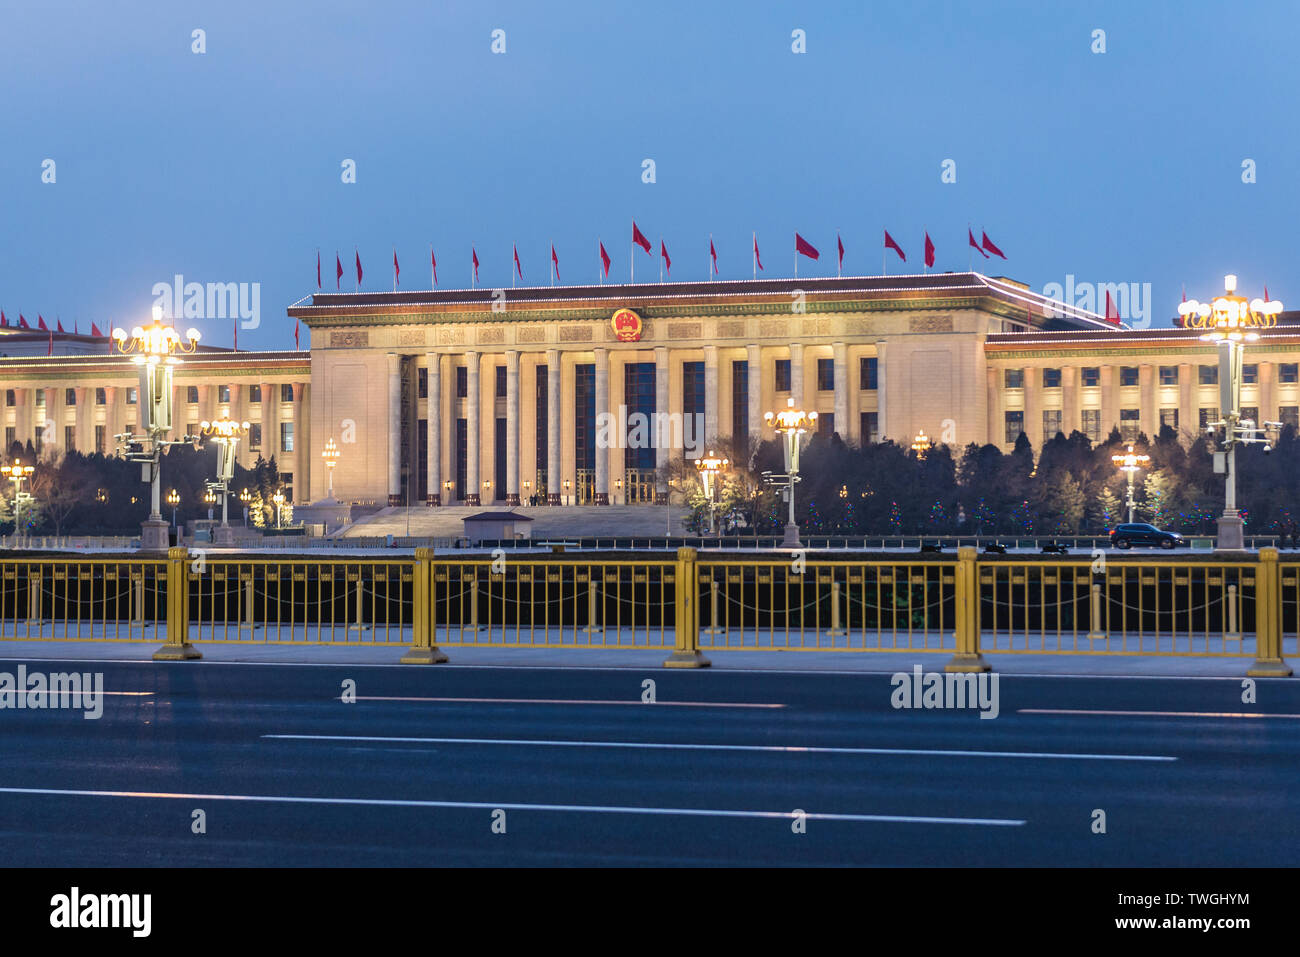 Exterior view of Great Hall of the People in Beijing, capital city of China Stock Photo